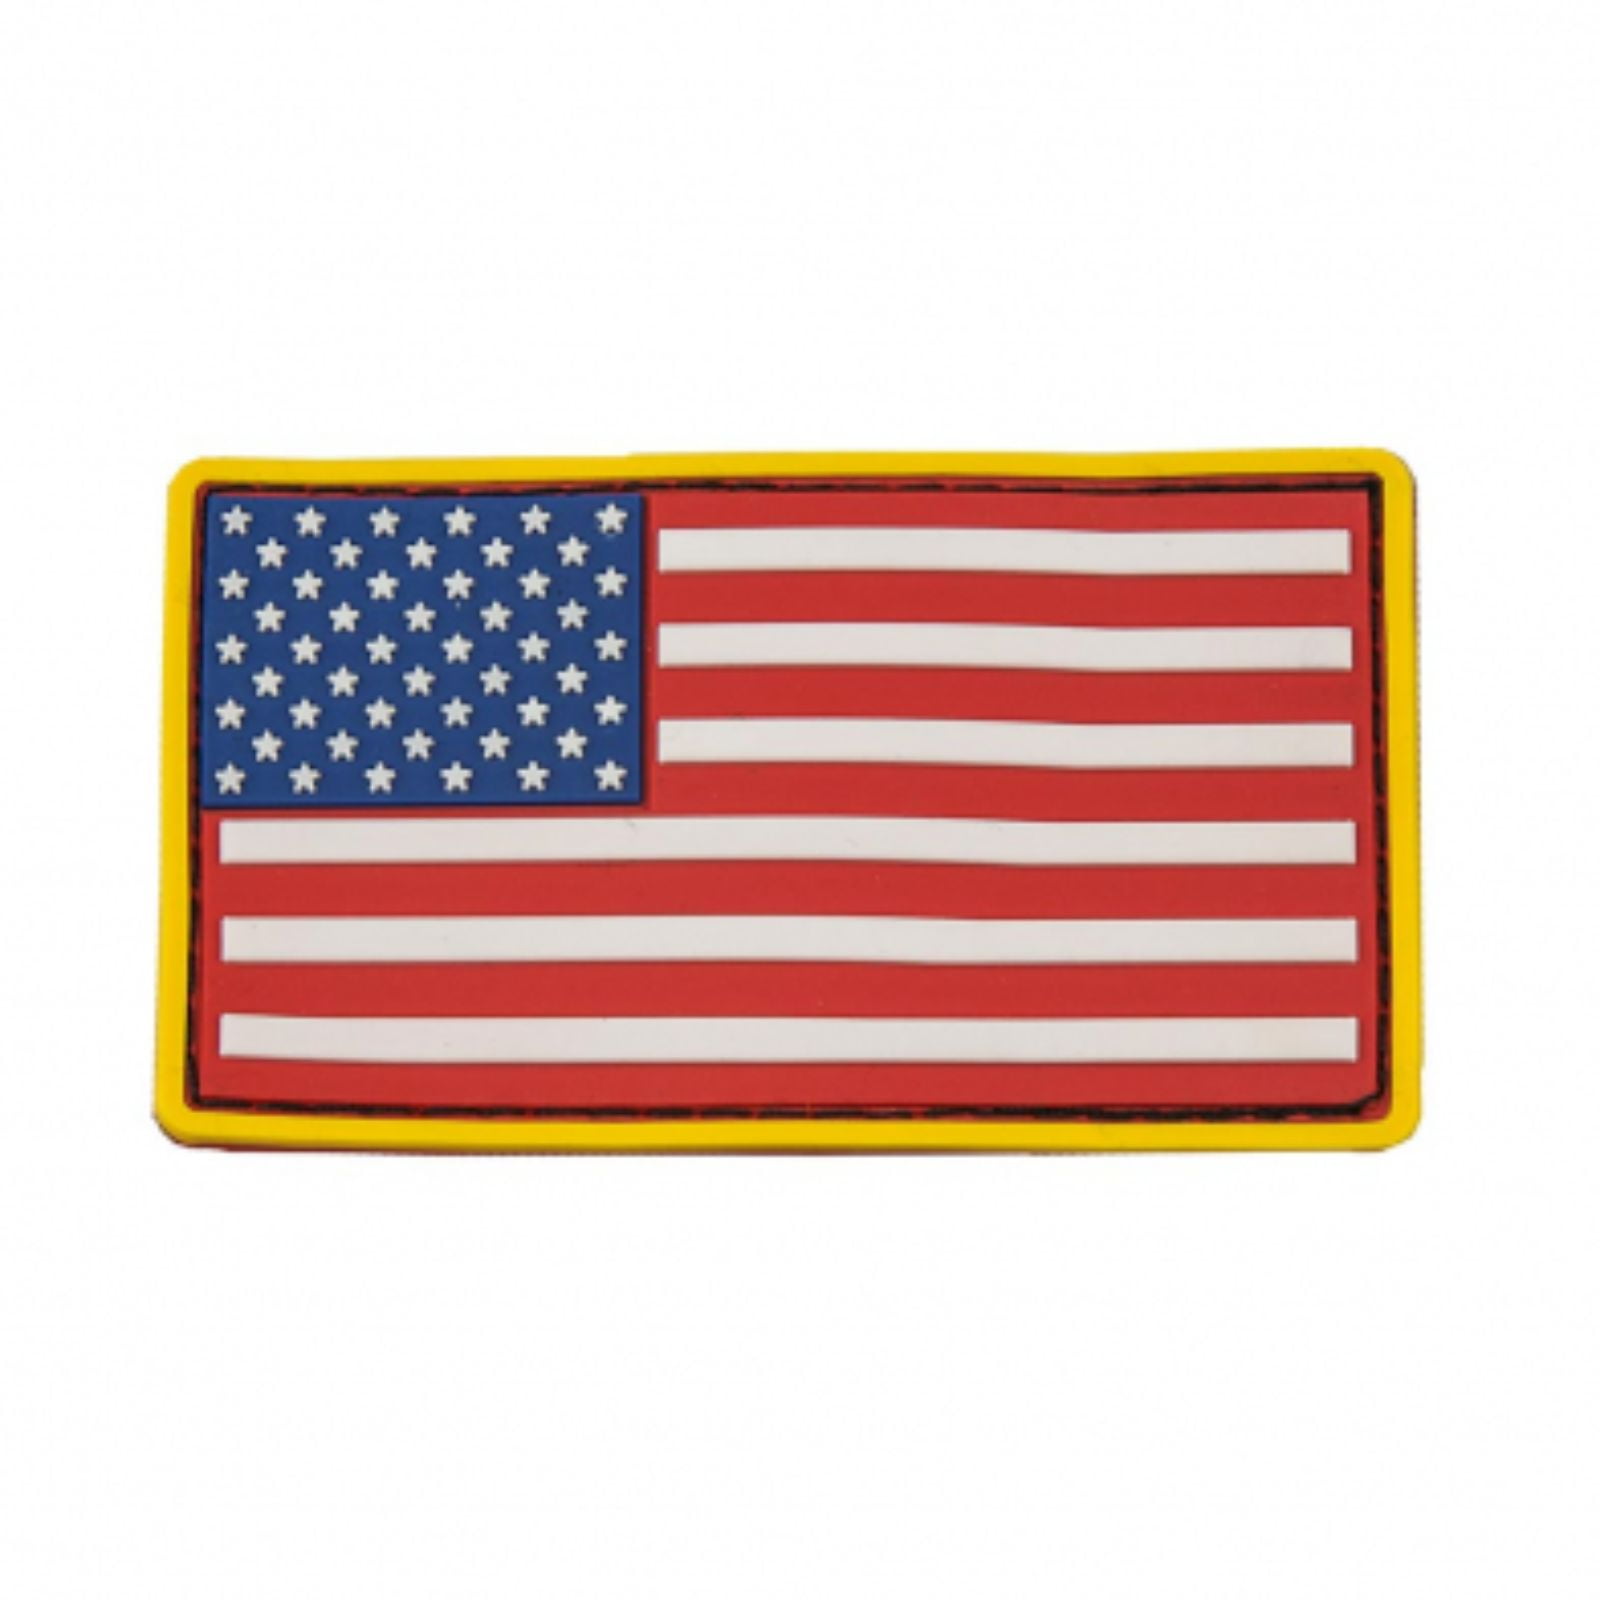 Tactical USA Flag Patch Law Enforcement Thin Blue Line American Flag US United States of America Military Morale Patches 